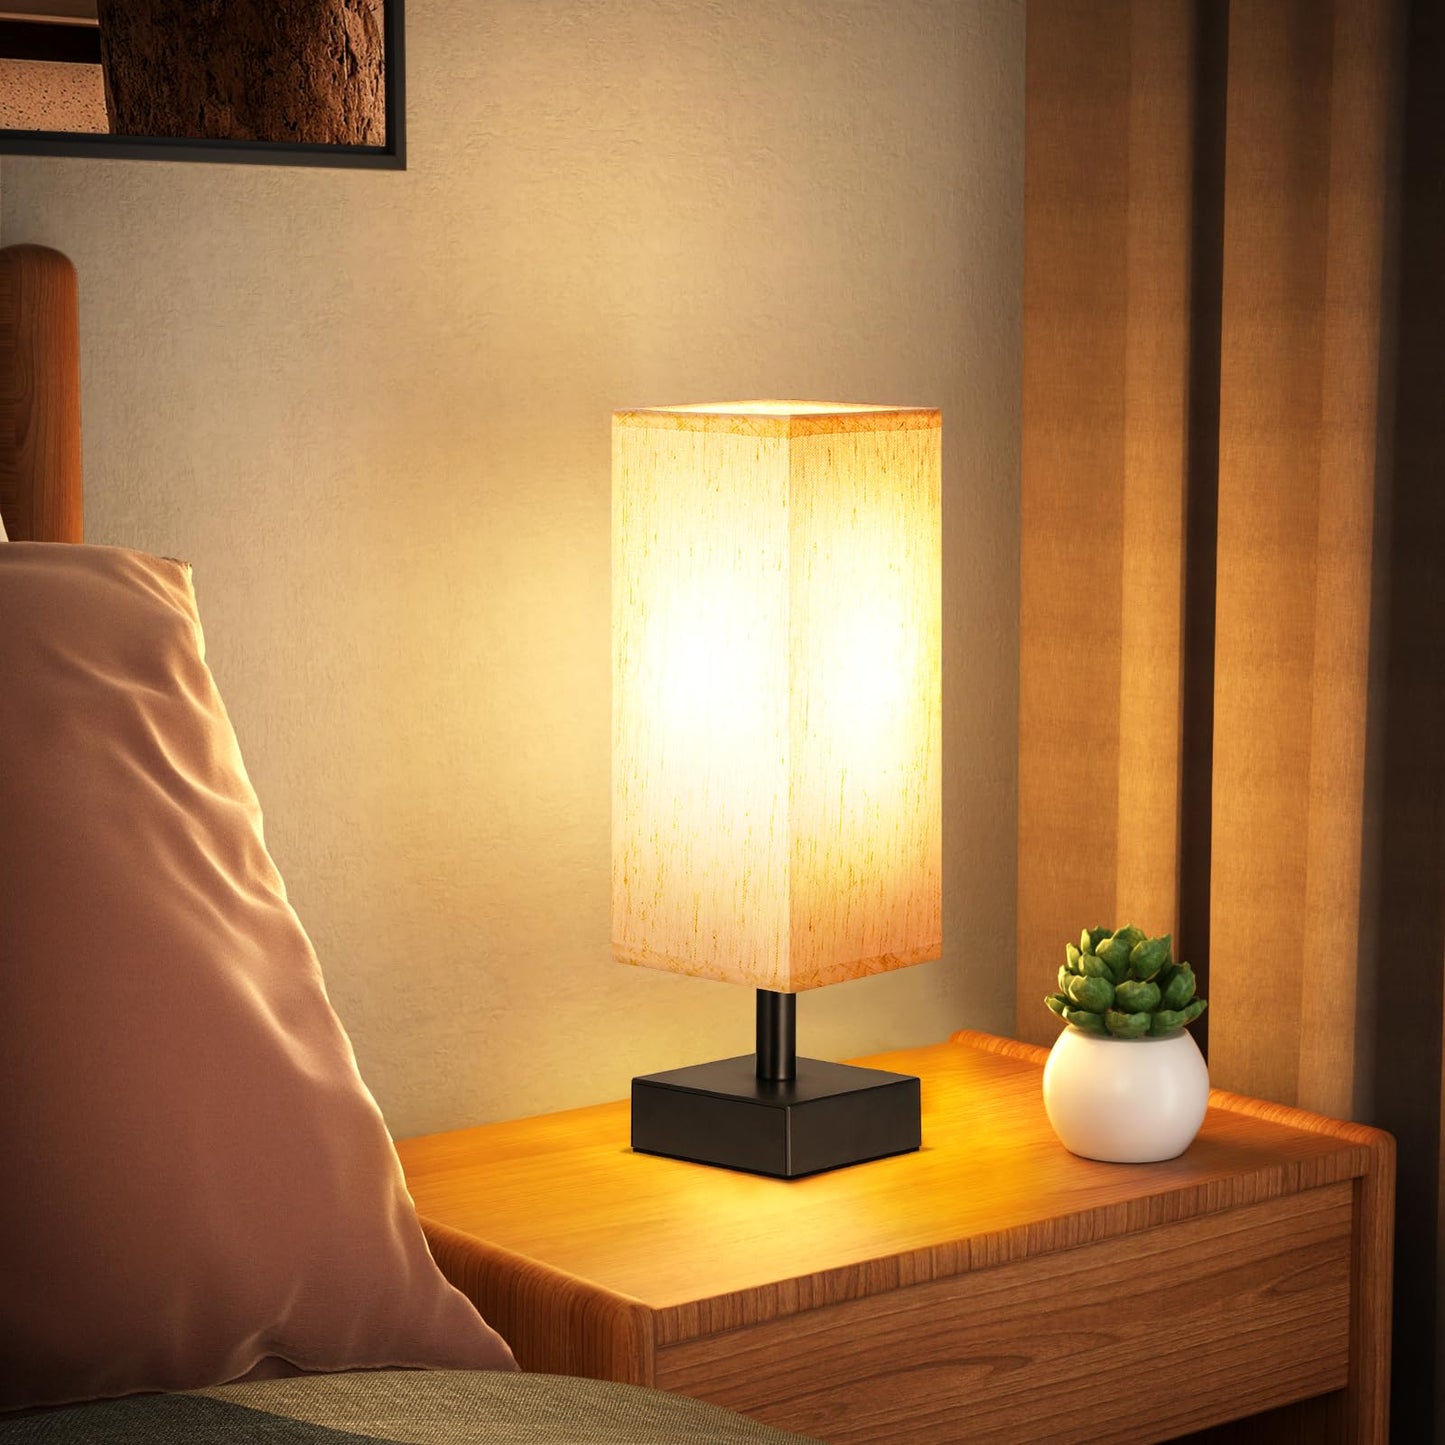 Small Table Lamp for Bedroom - Bedside Lamps for Nightstand, Minimalist Night Stand Light Lamp with Square Fabric Shade, Desk Reading Lamp for Kids Room Living Room Office Dorm